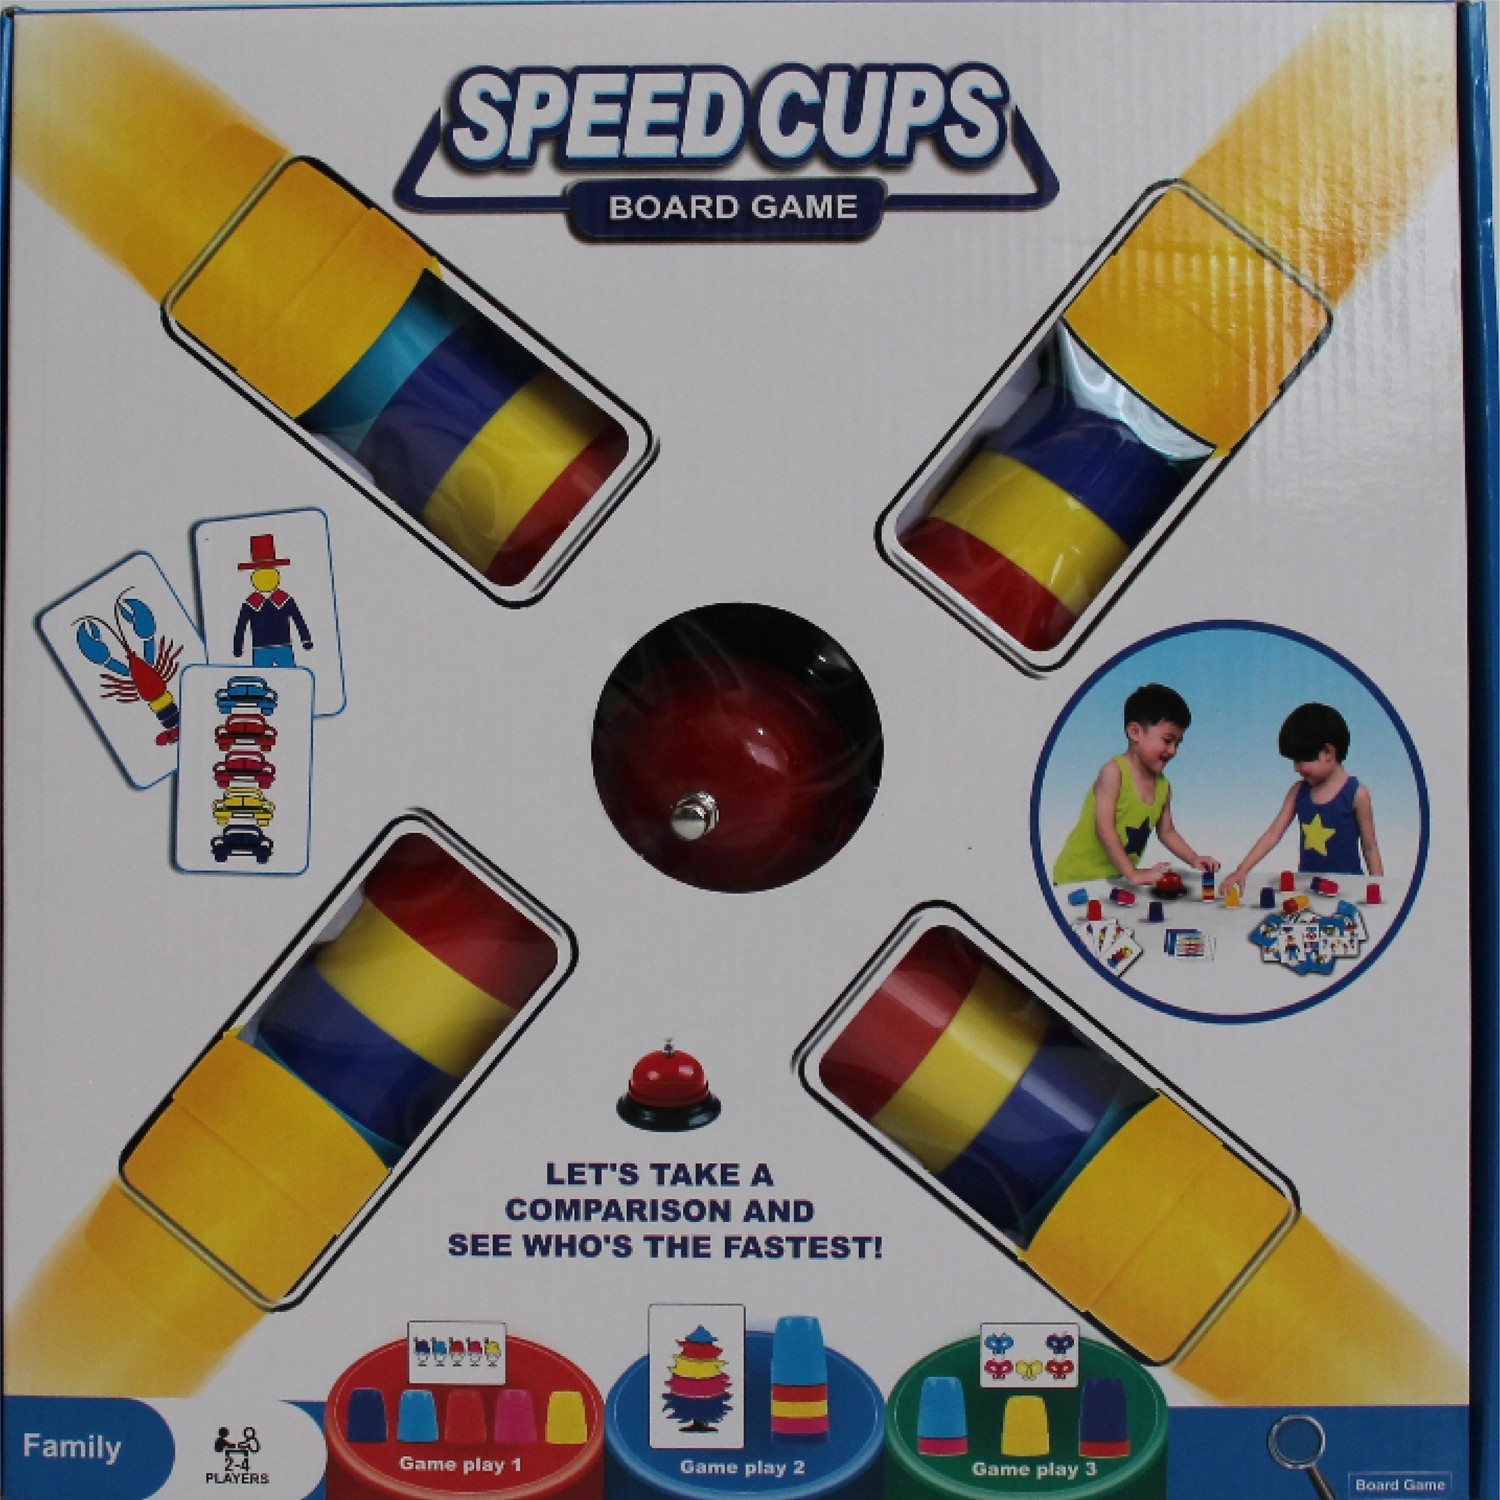 Cup speed